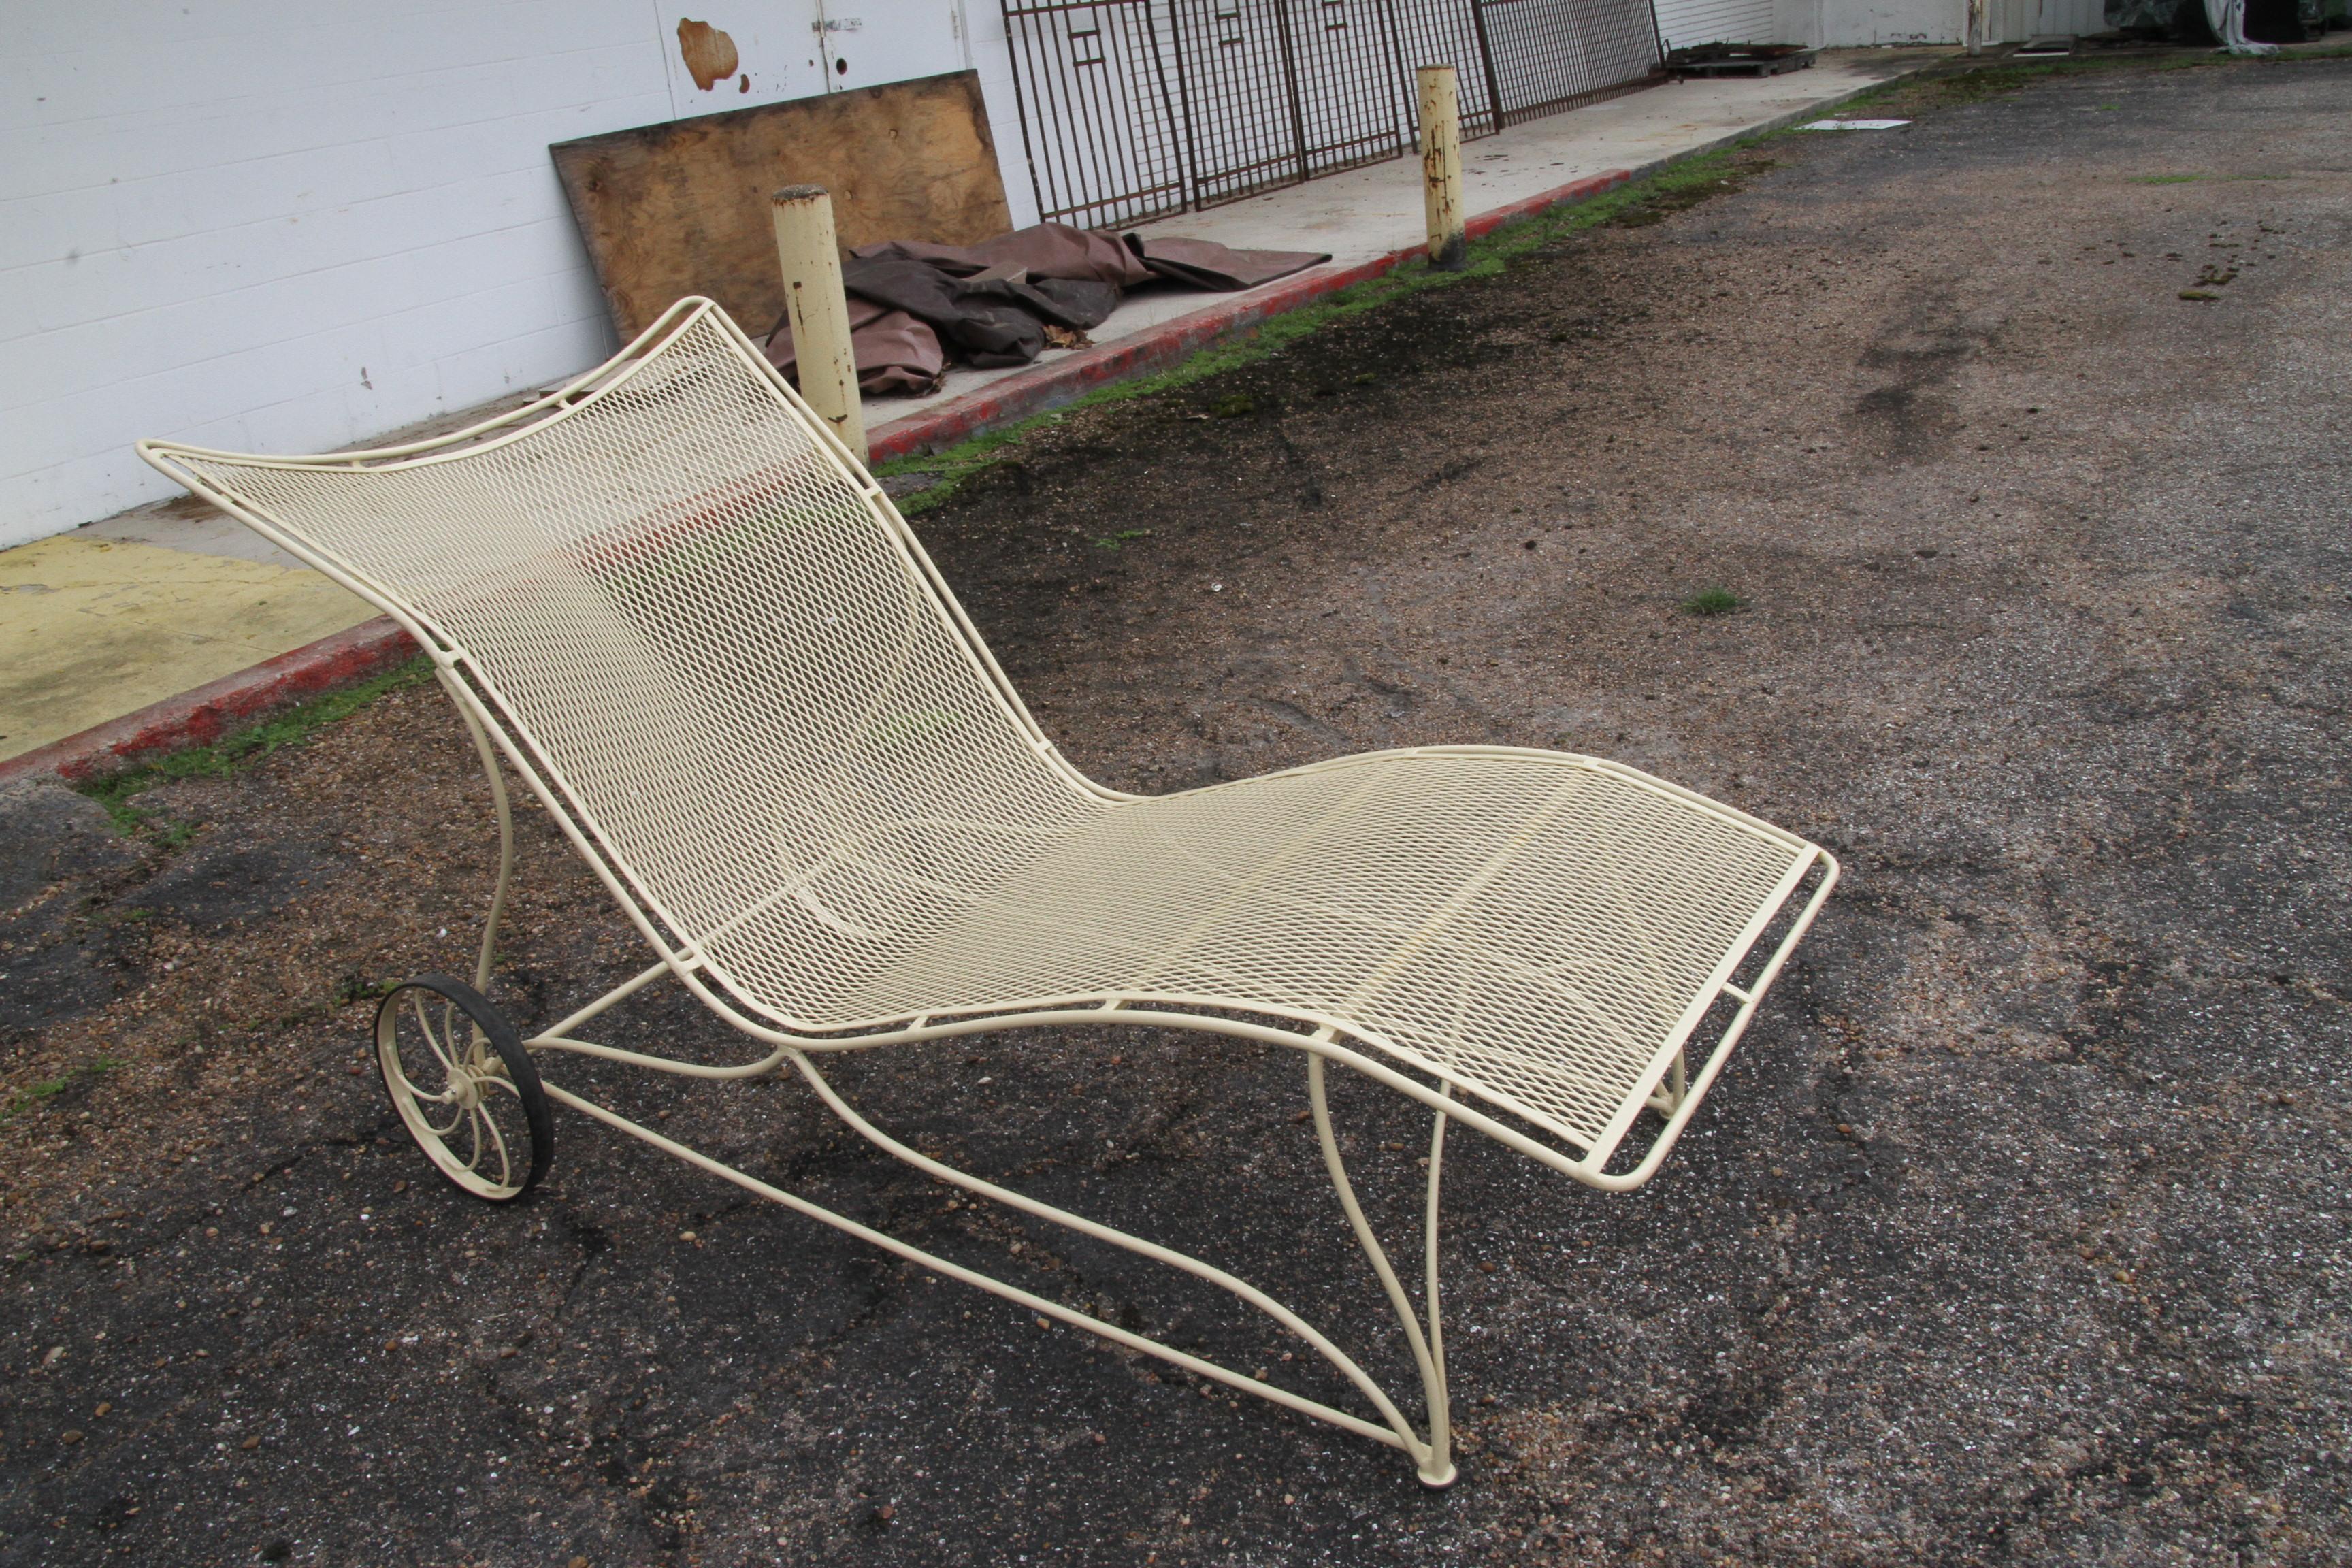 1 Vintage Russell woodard patio chaise

One oversized wrought iron chaise lounges featuring wide frames and wheels. Recently restored in rich buttercream. 
Measurements: 40.5